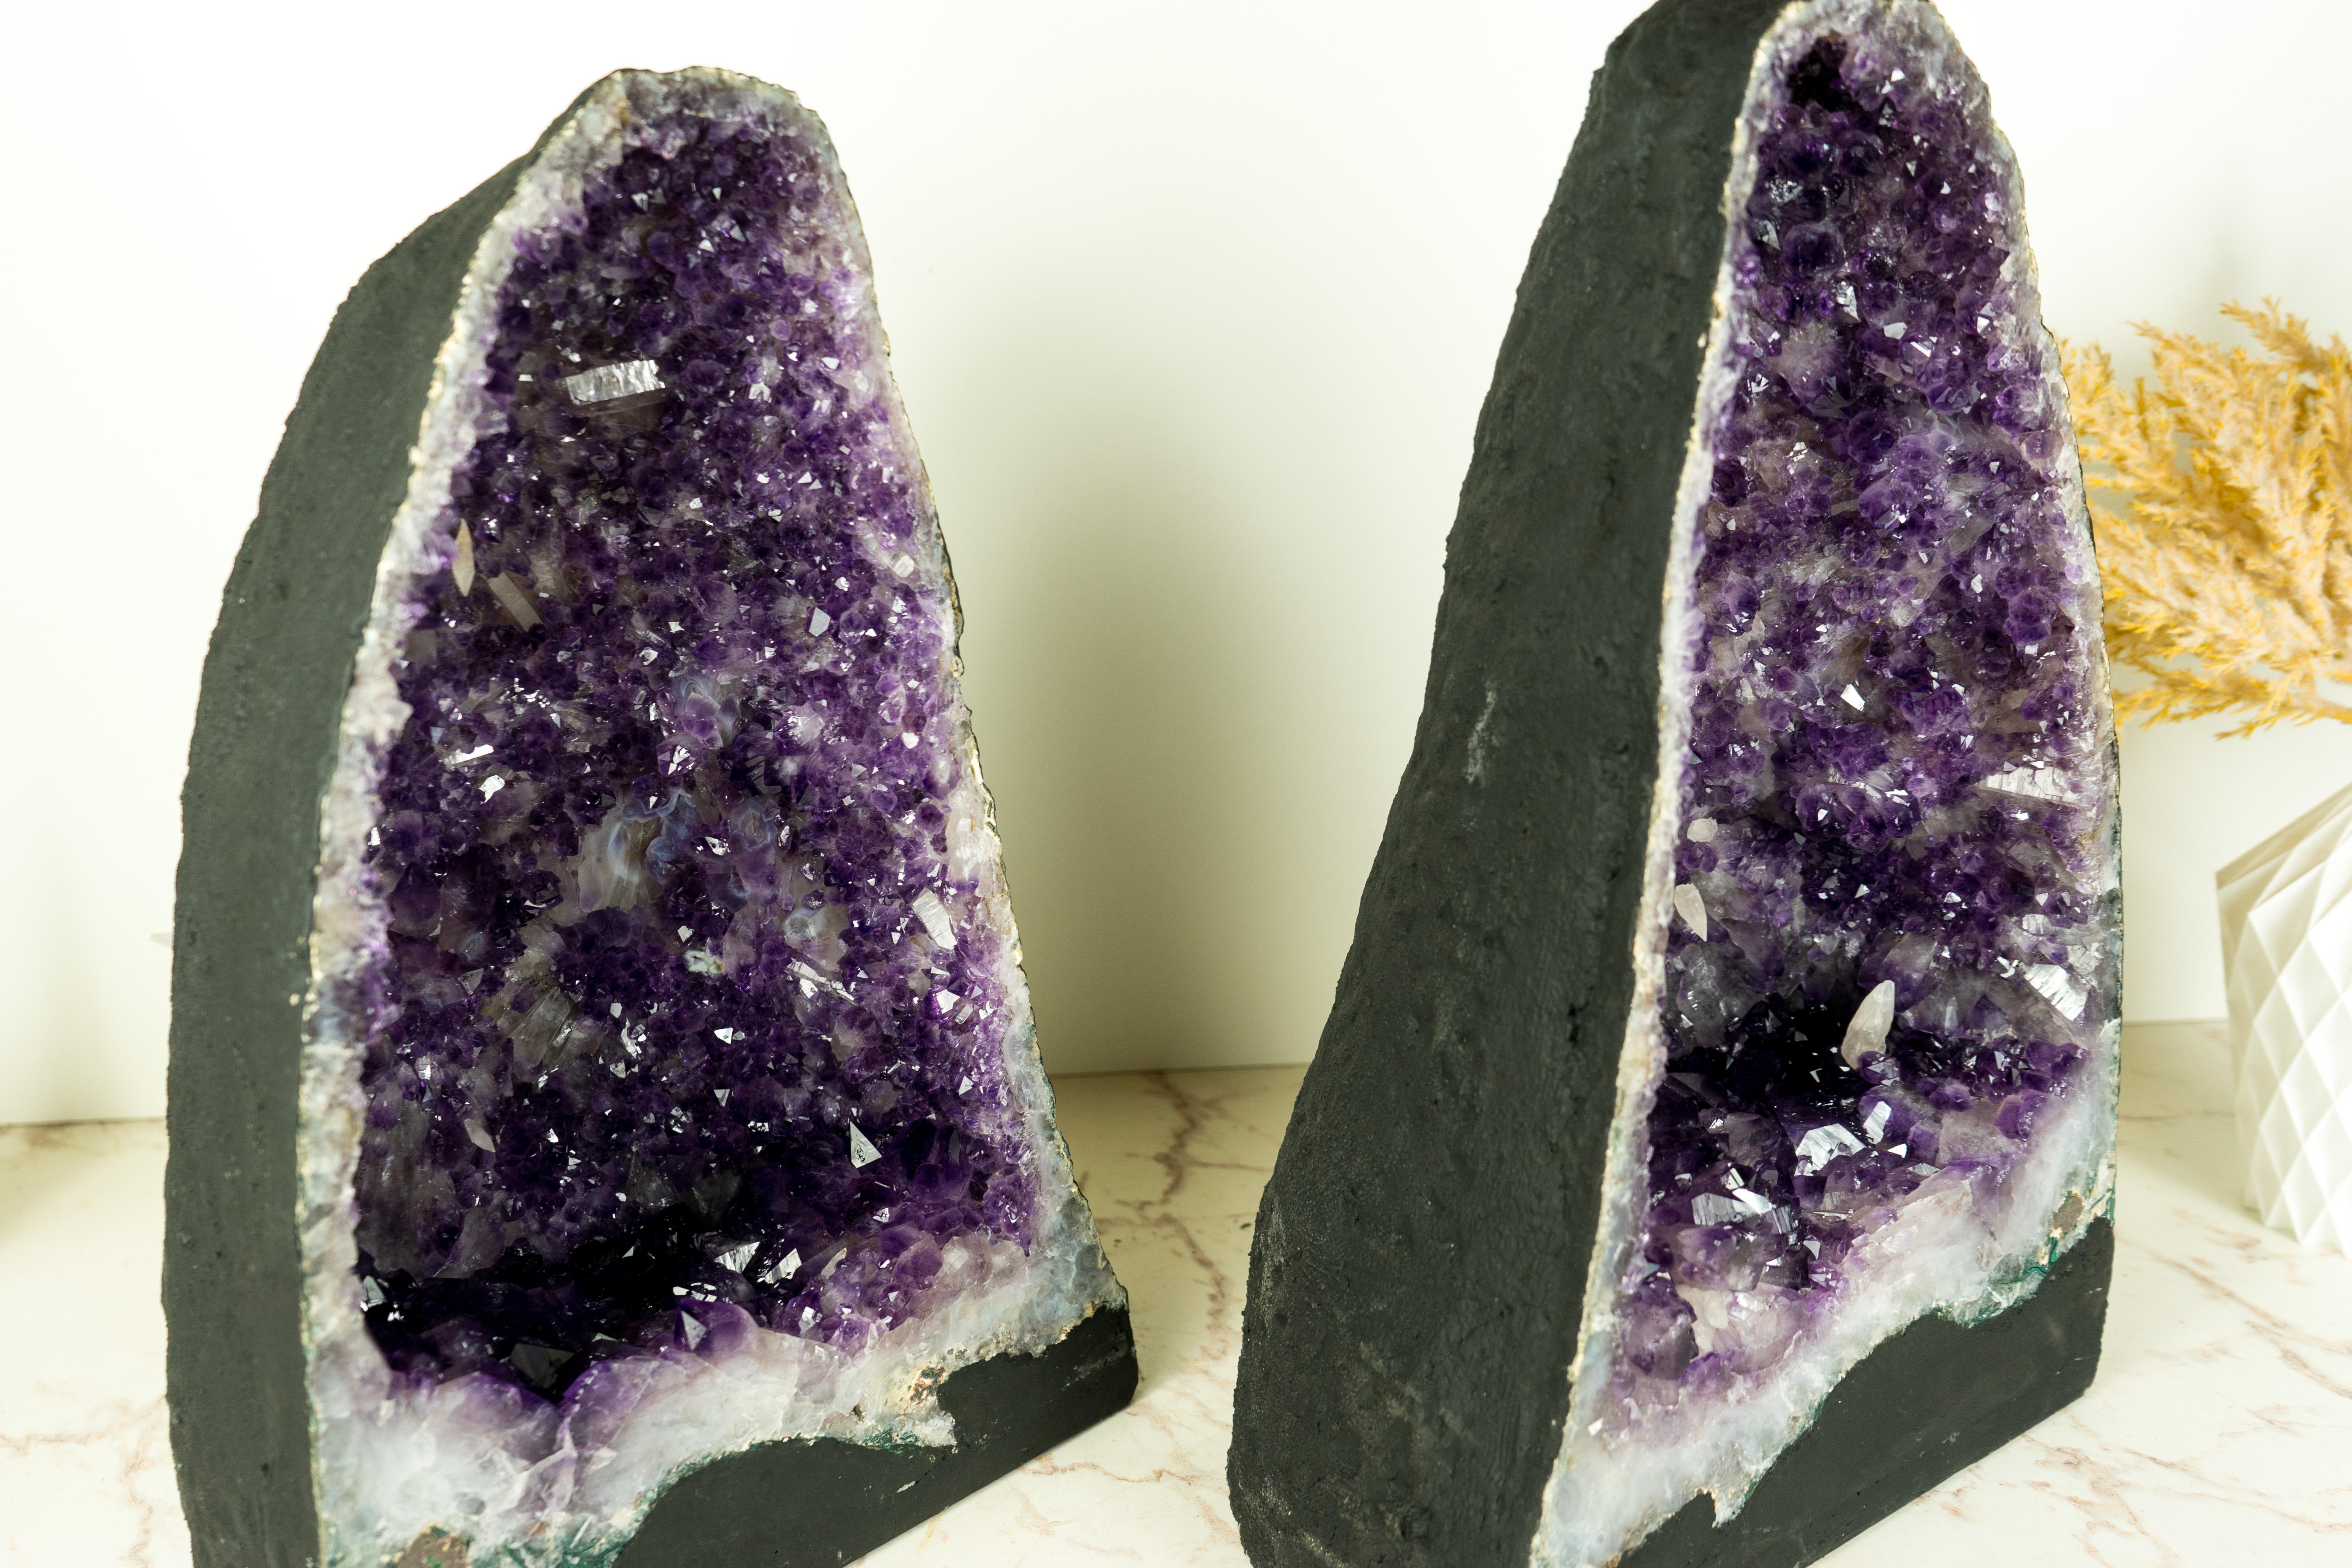 Brazilian Pair of Purple Amethyst Geodes with Rare Flower-Like Druzy Formation and Calcite For Sale